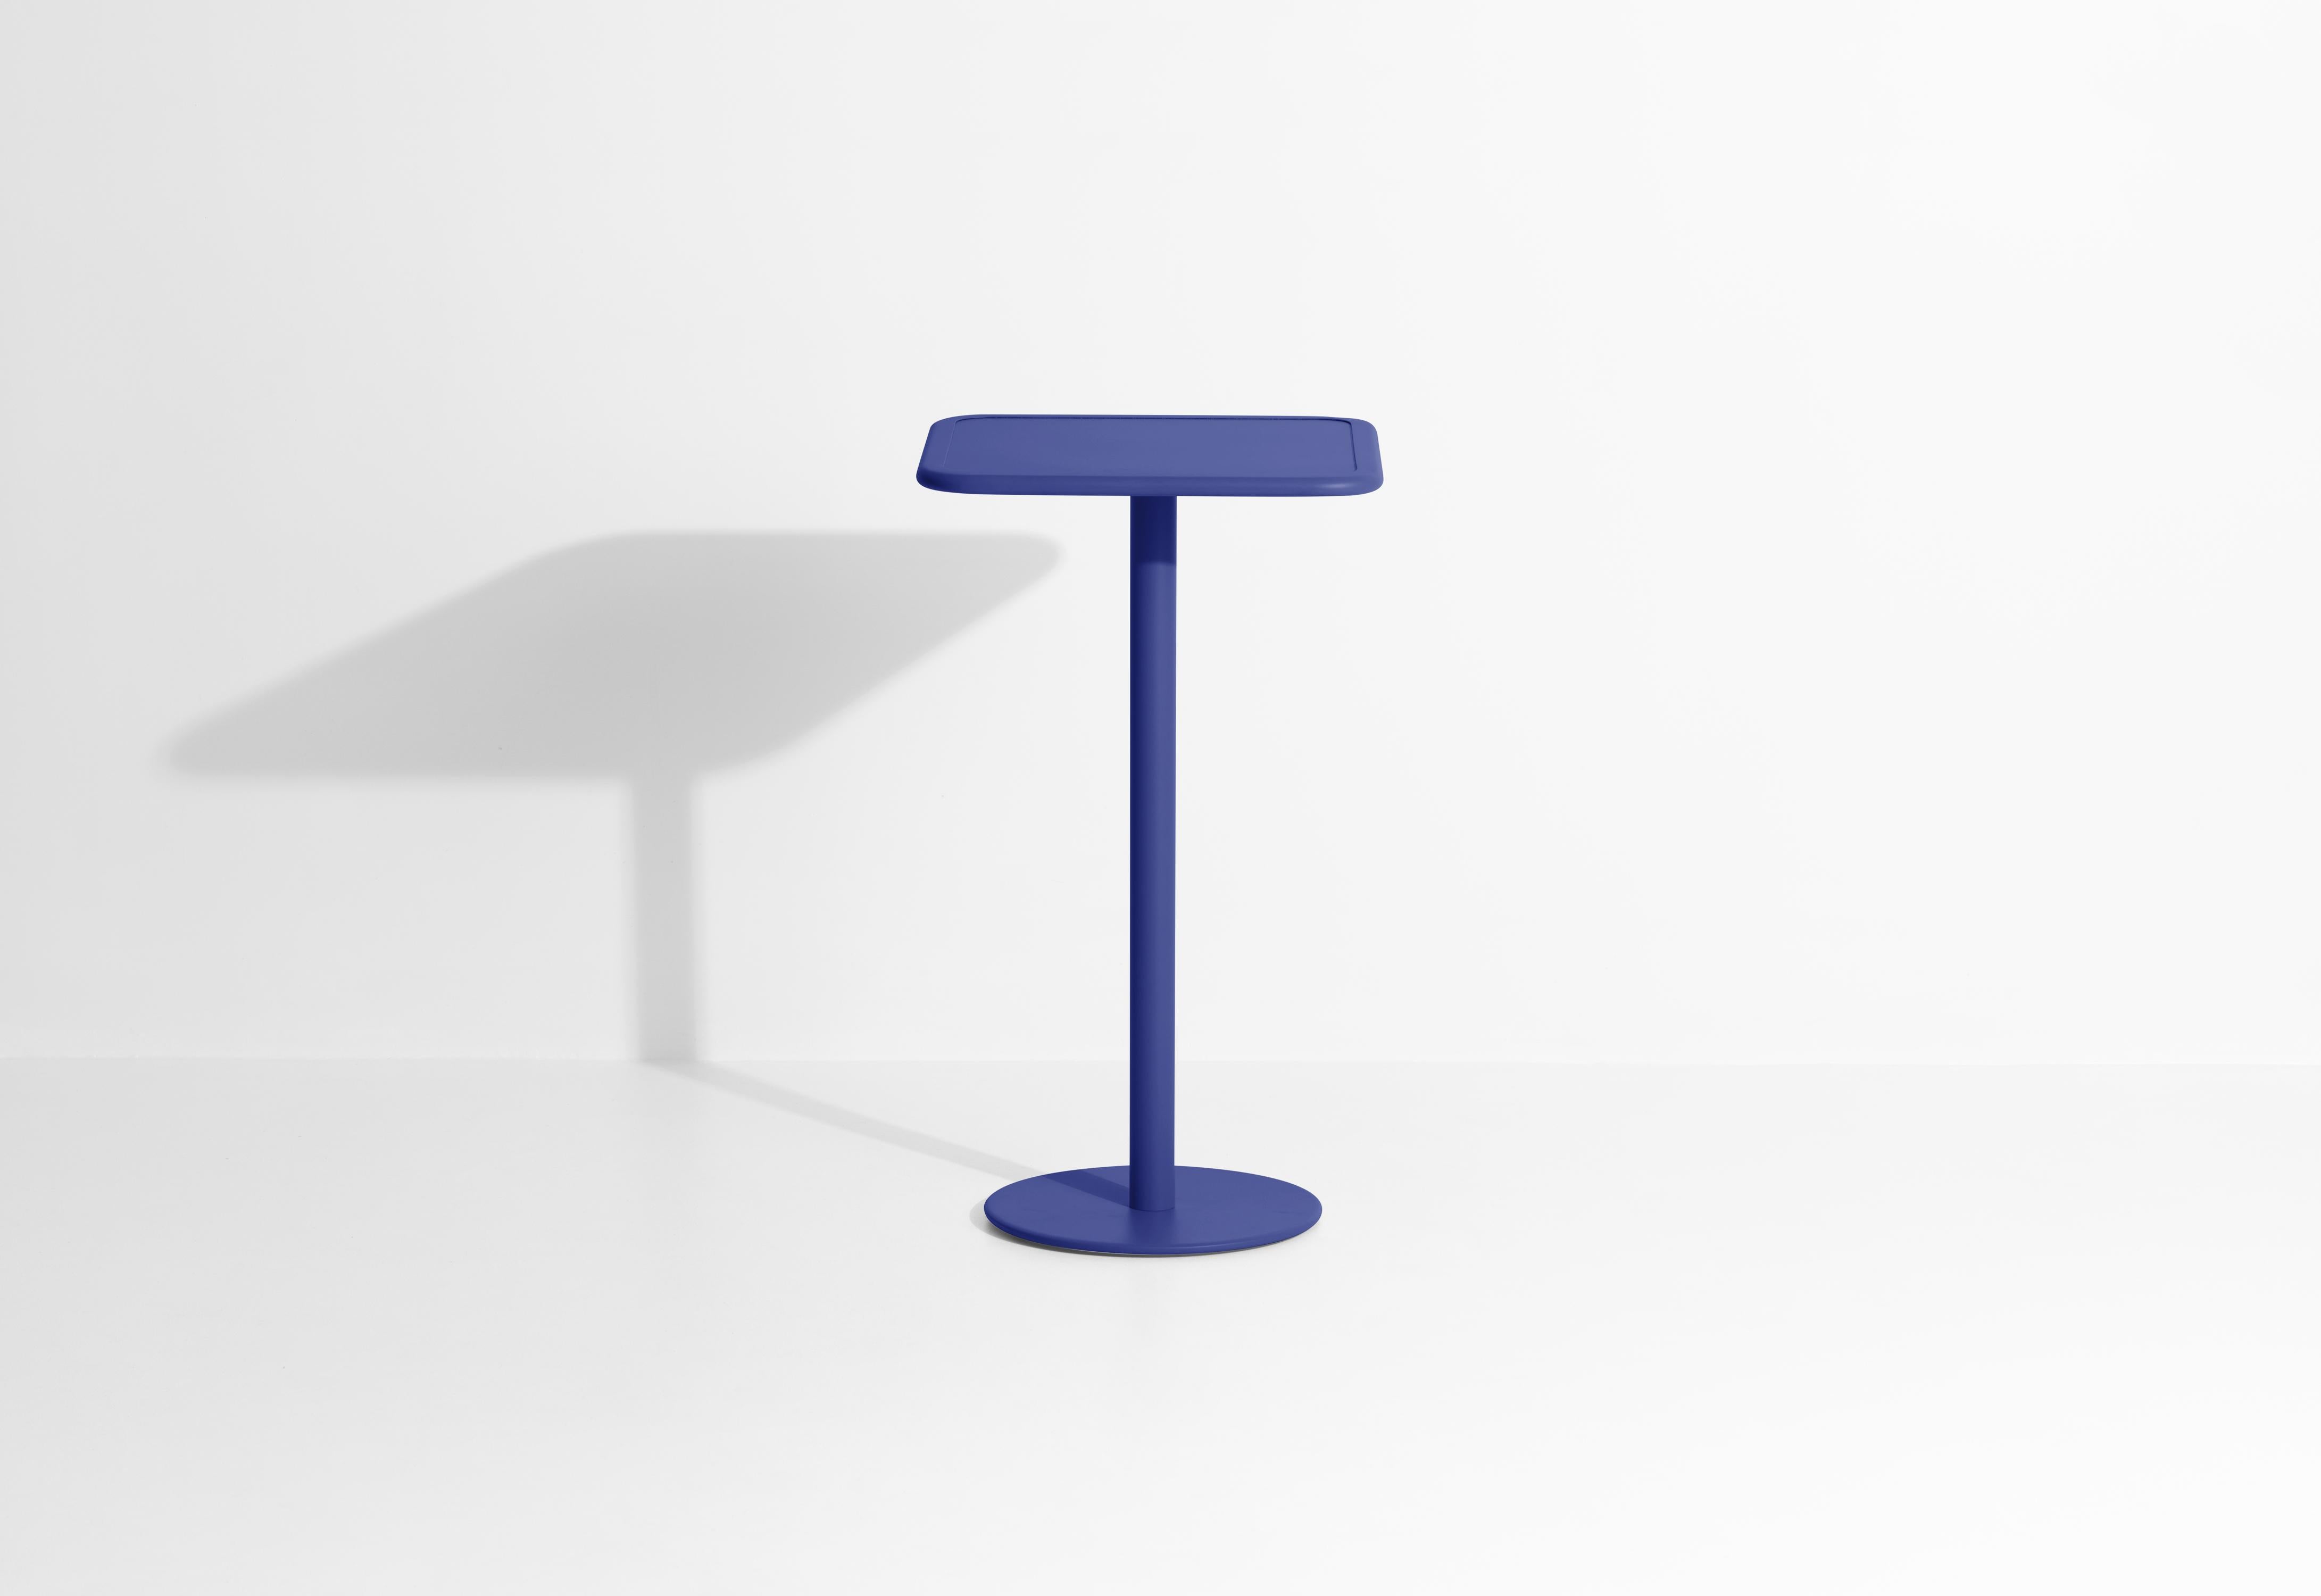 Petite Friture Week-End Square High Table in Blue Aluminium, 2017 In New Condition For Sale In Brooklyn, NY